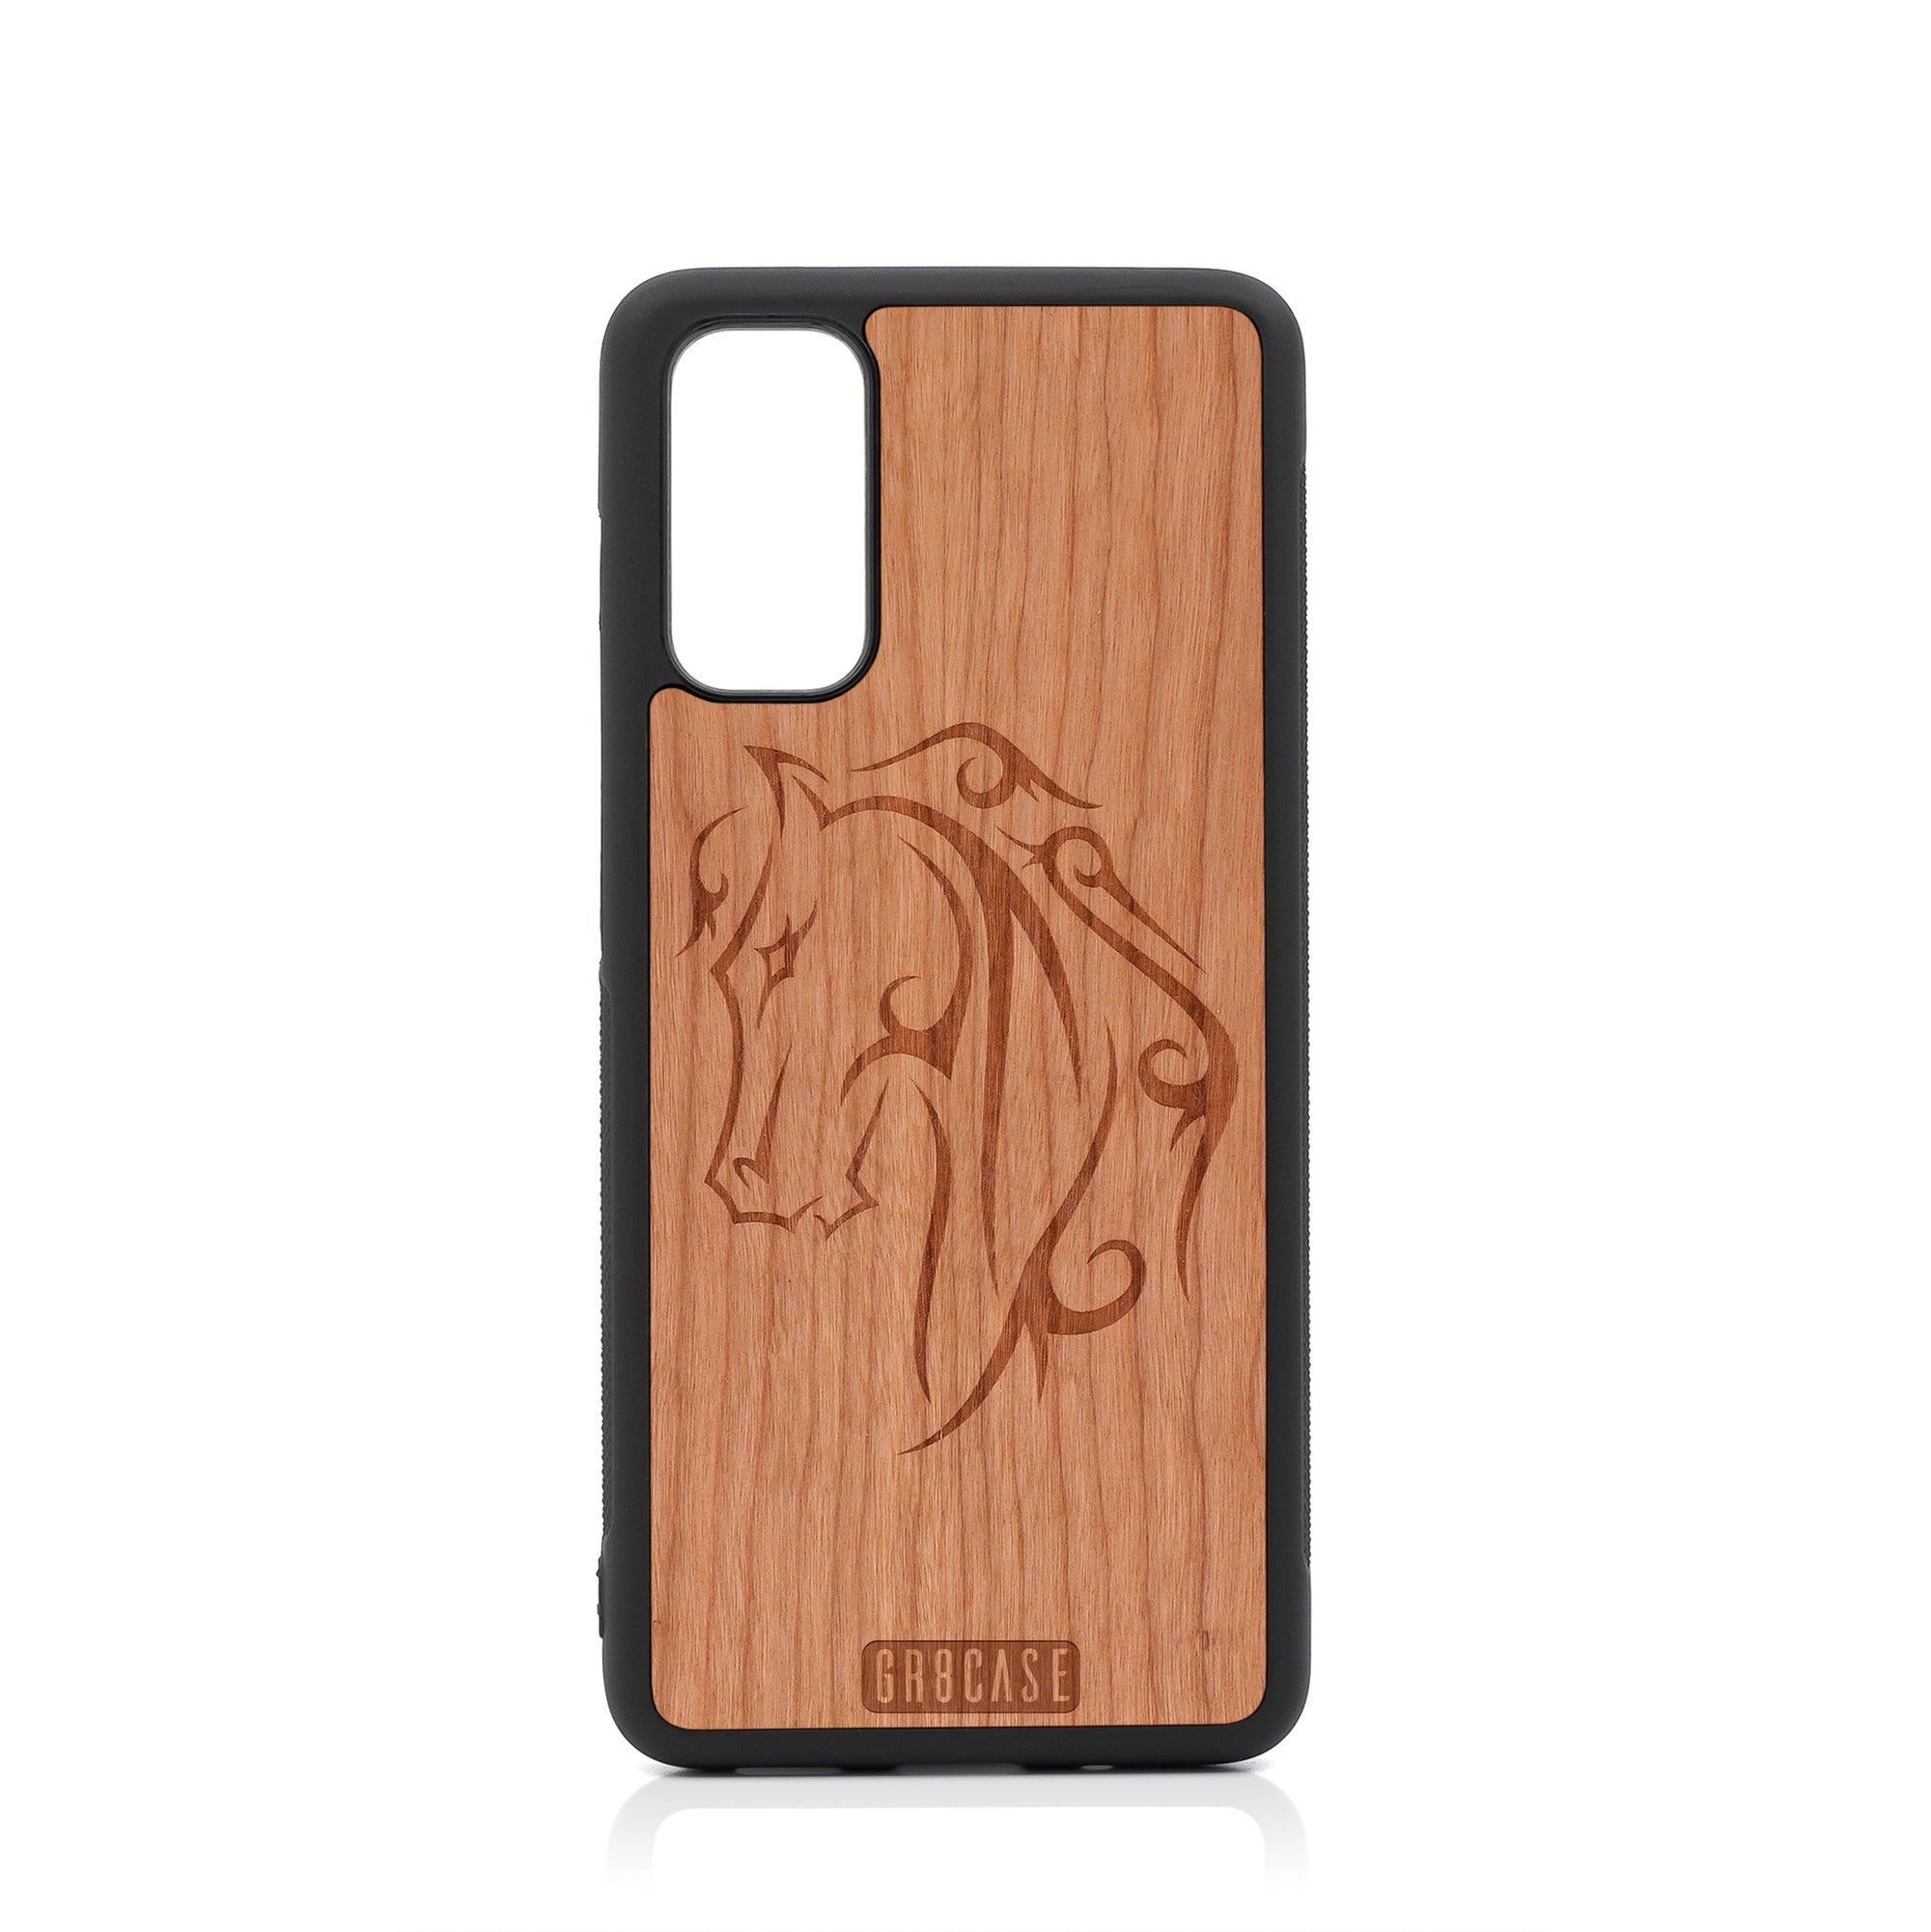 Horse Tattoo Design Wood Case For Samsung Galaxy S20 by GR8CASE